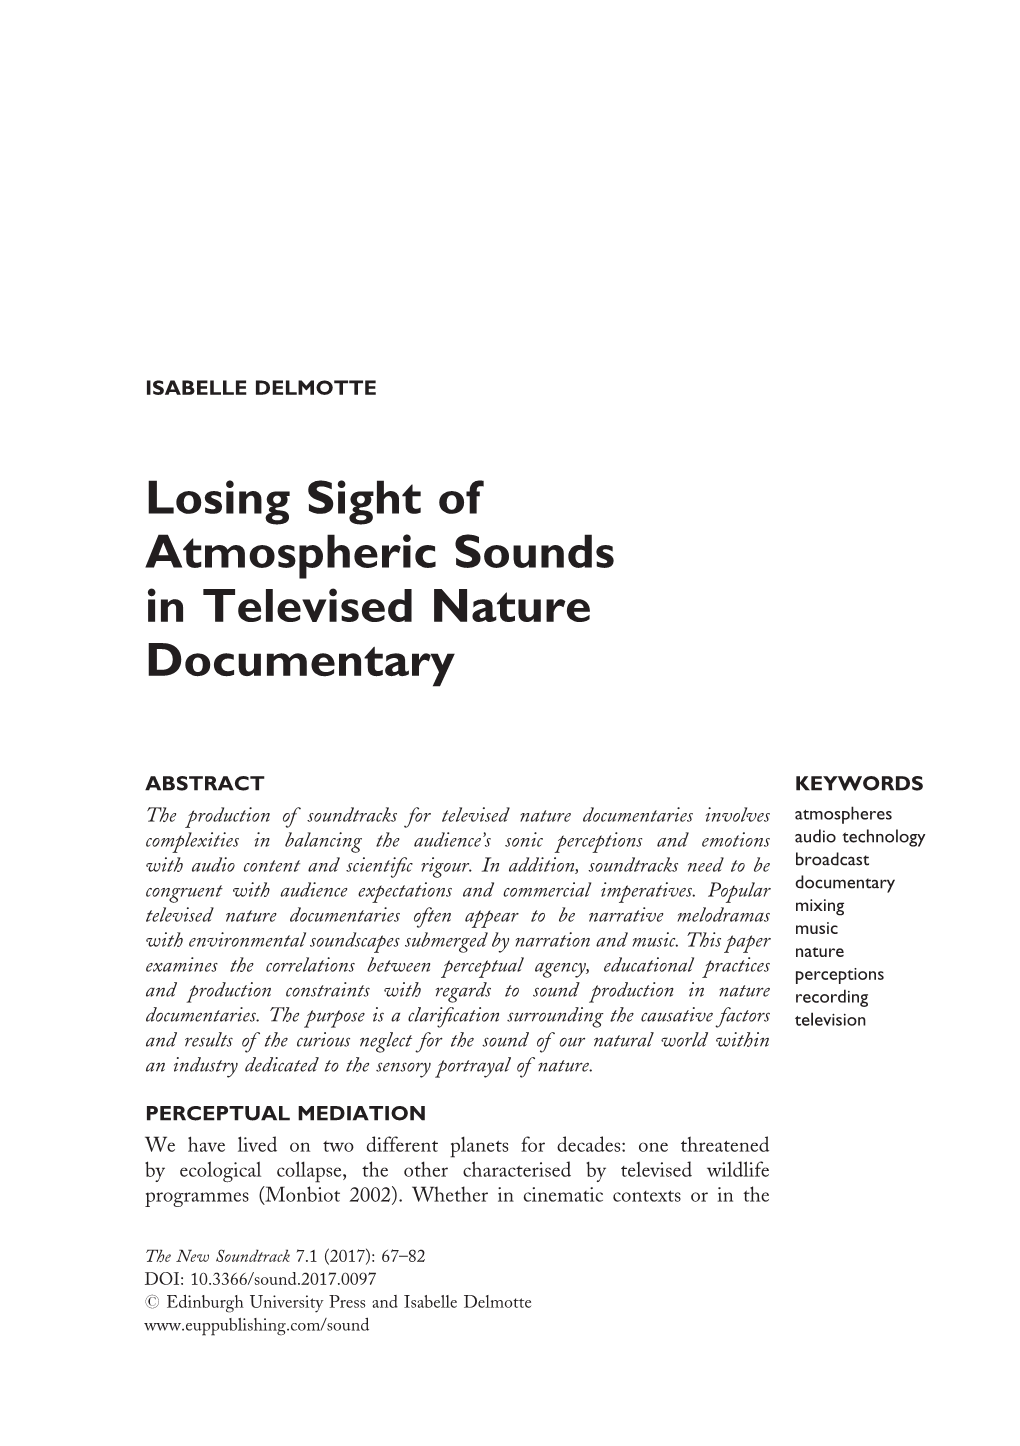 Losing Sight of Atmospheric Sounds in Televised Nature Documentary